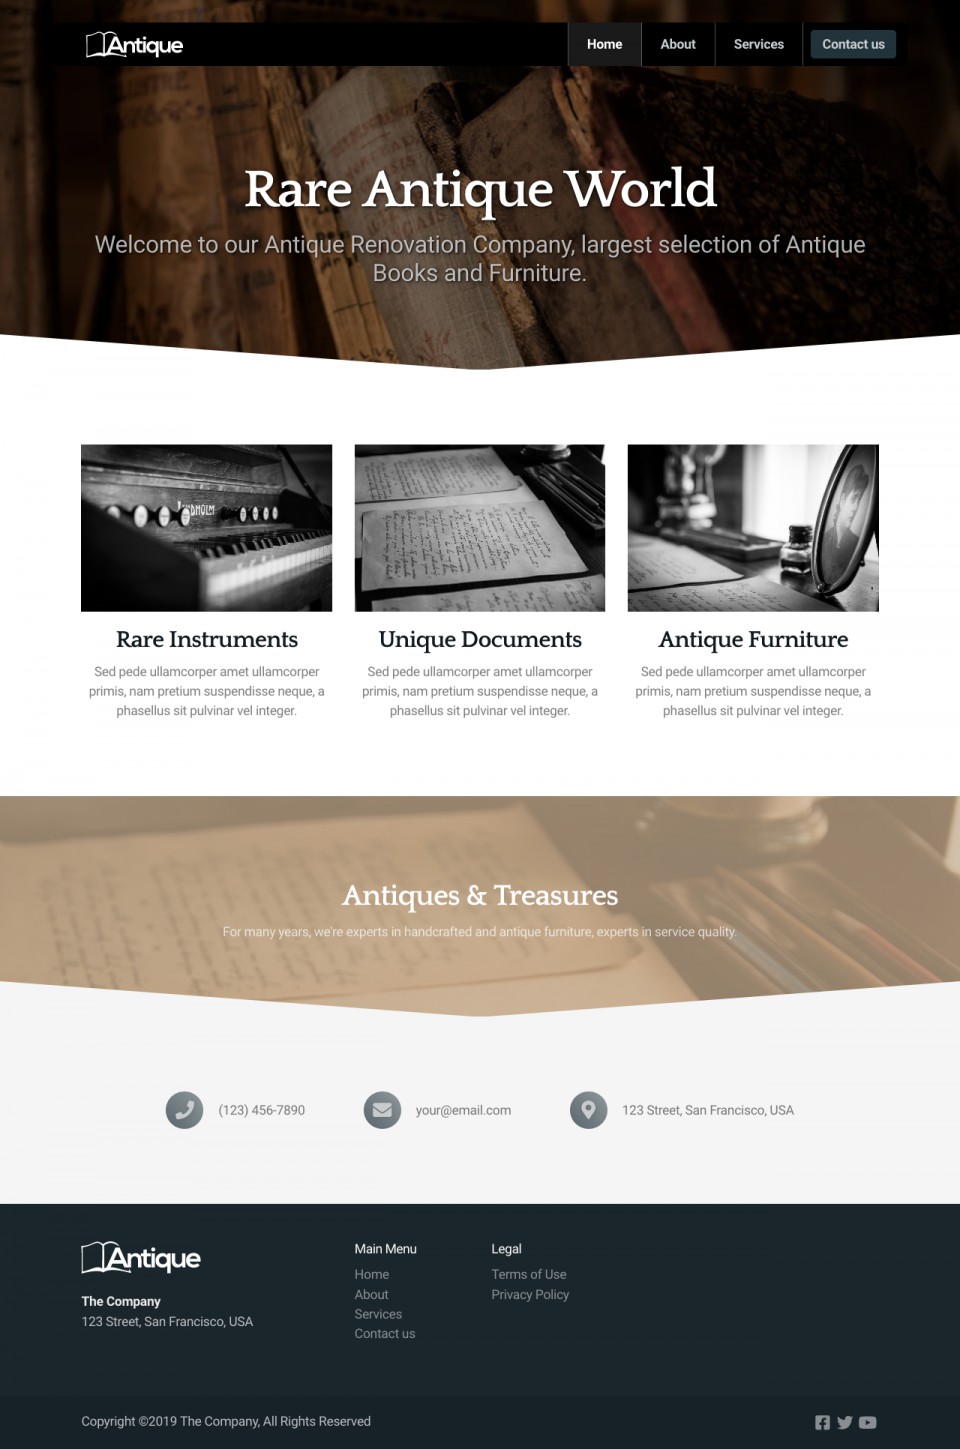 Antique Website Template - Ideal for businesses seeking a vintage or classic look